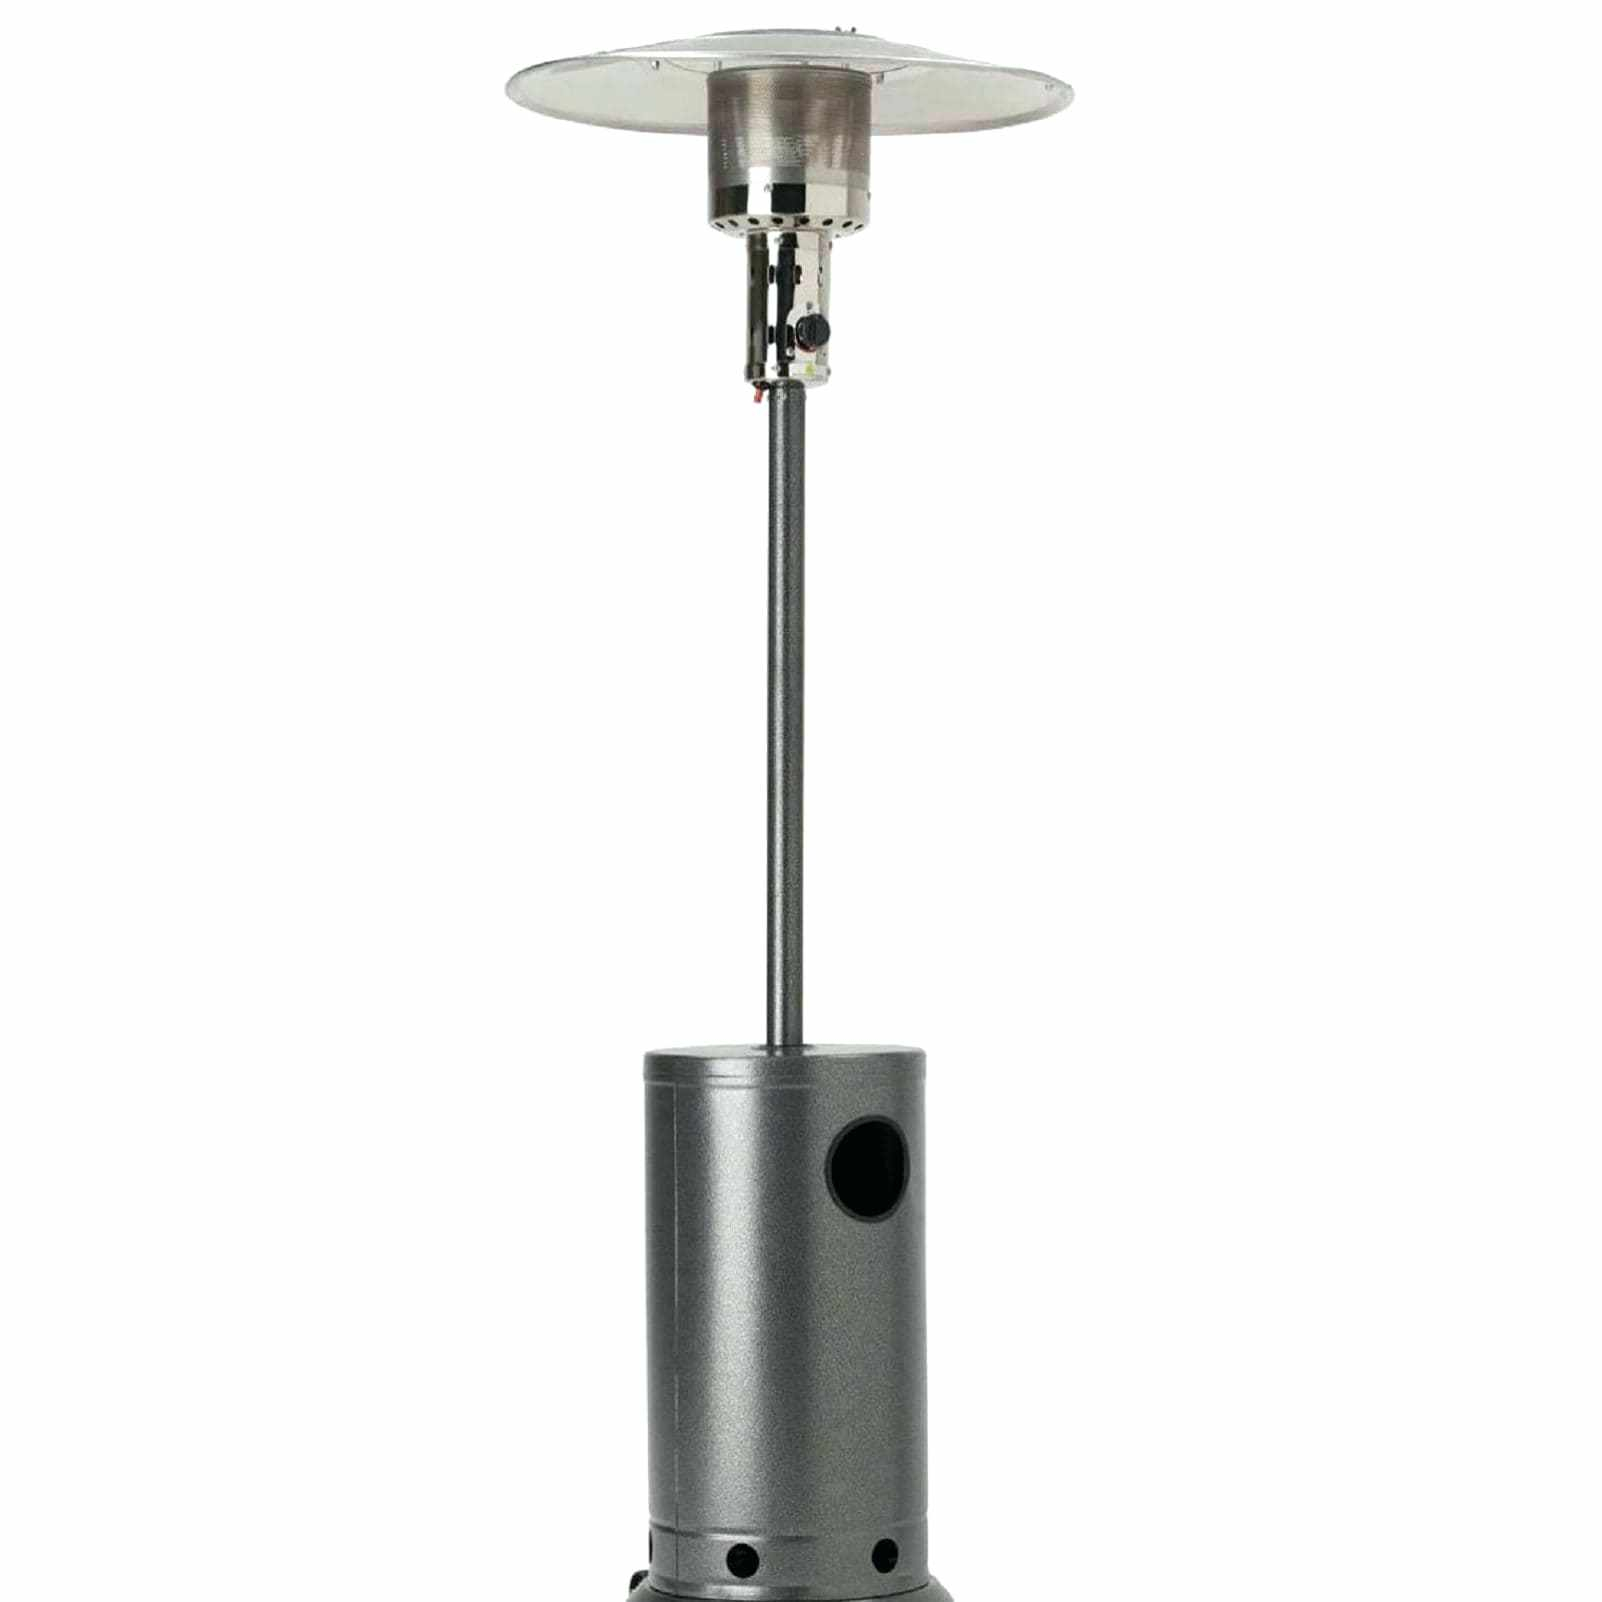 Classic Flame Patio Heater Gas Heaters Small Calor Uk pertaining to sizing 1602 X 1602